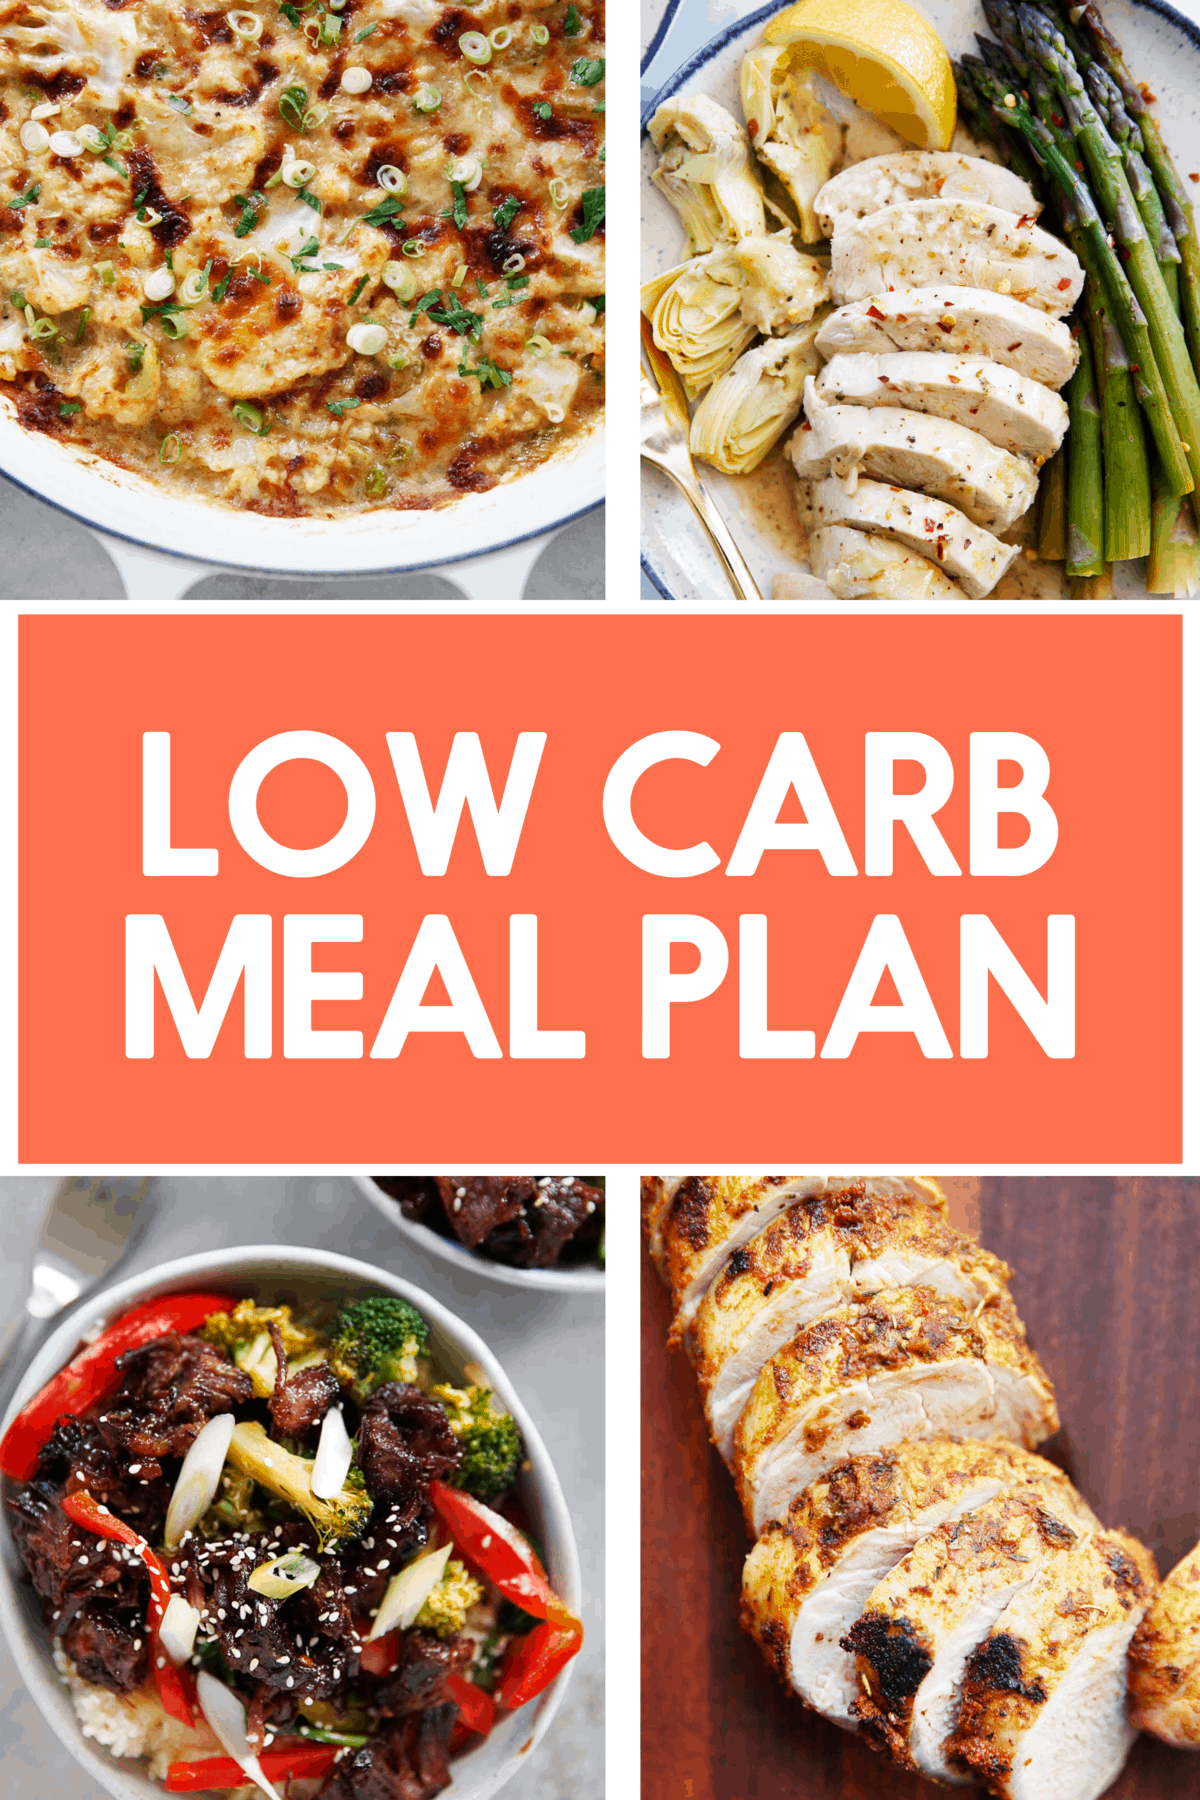 Low Carb Meal Plan - Lexi's Clean Kitchen